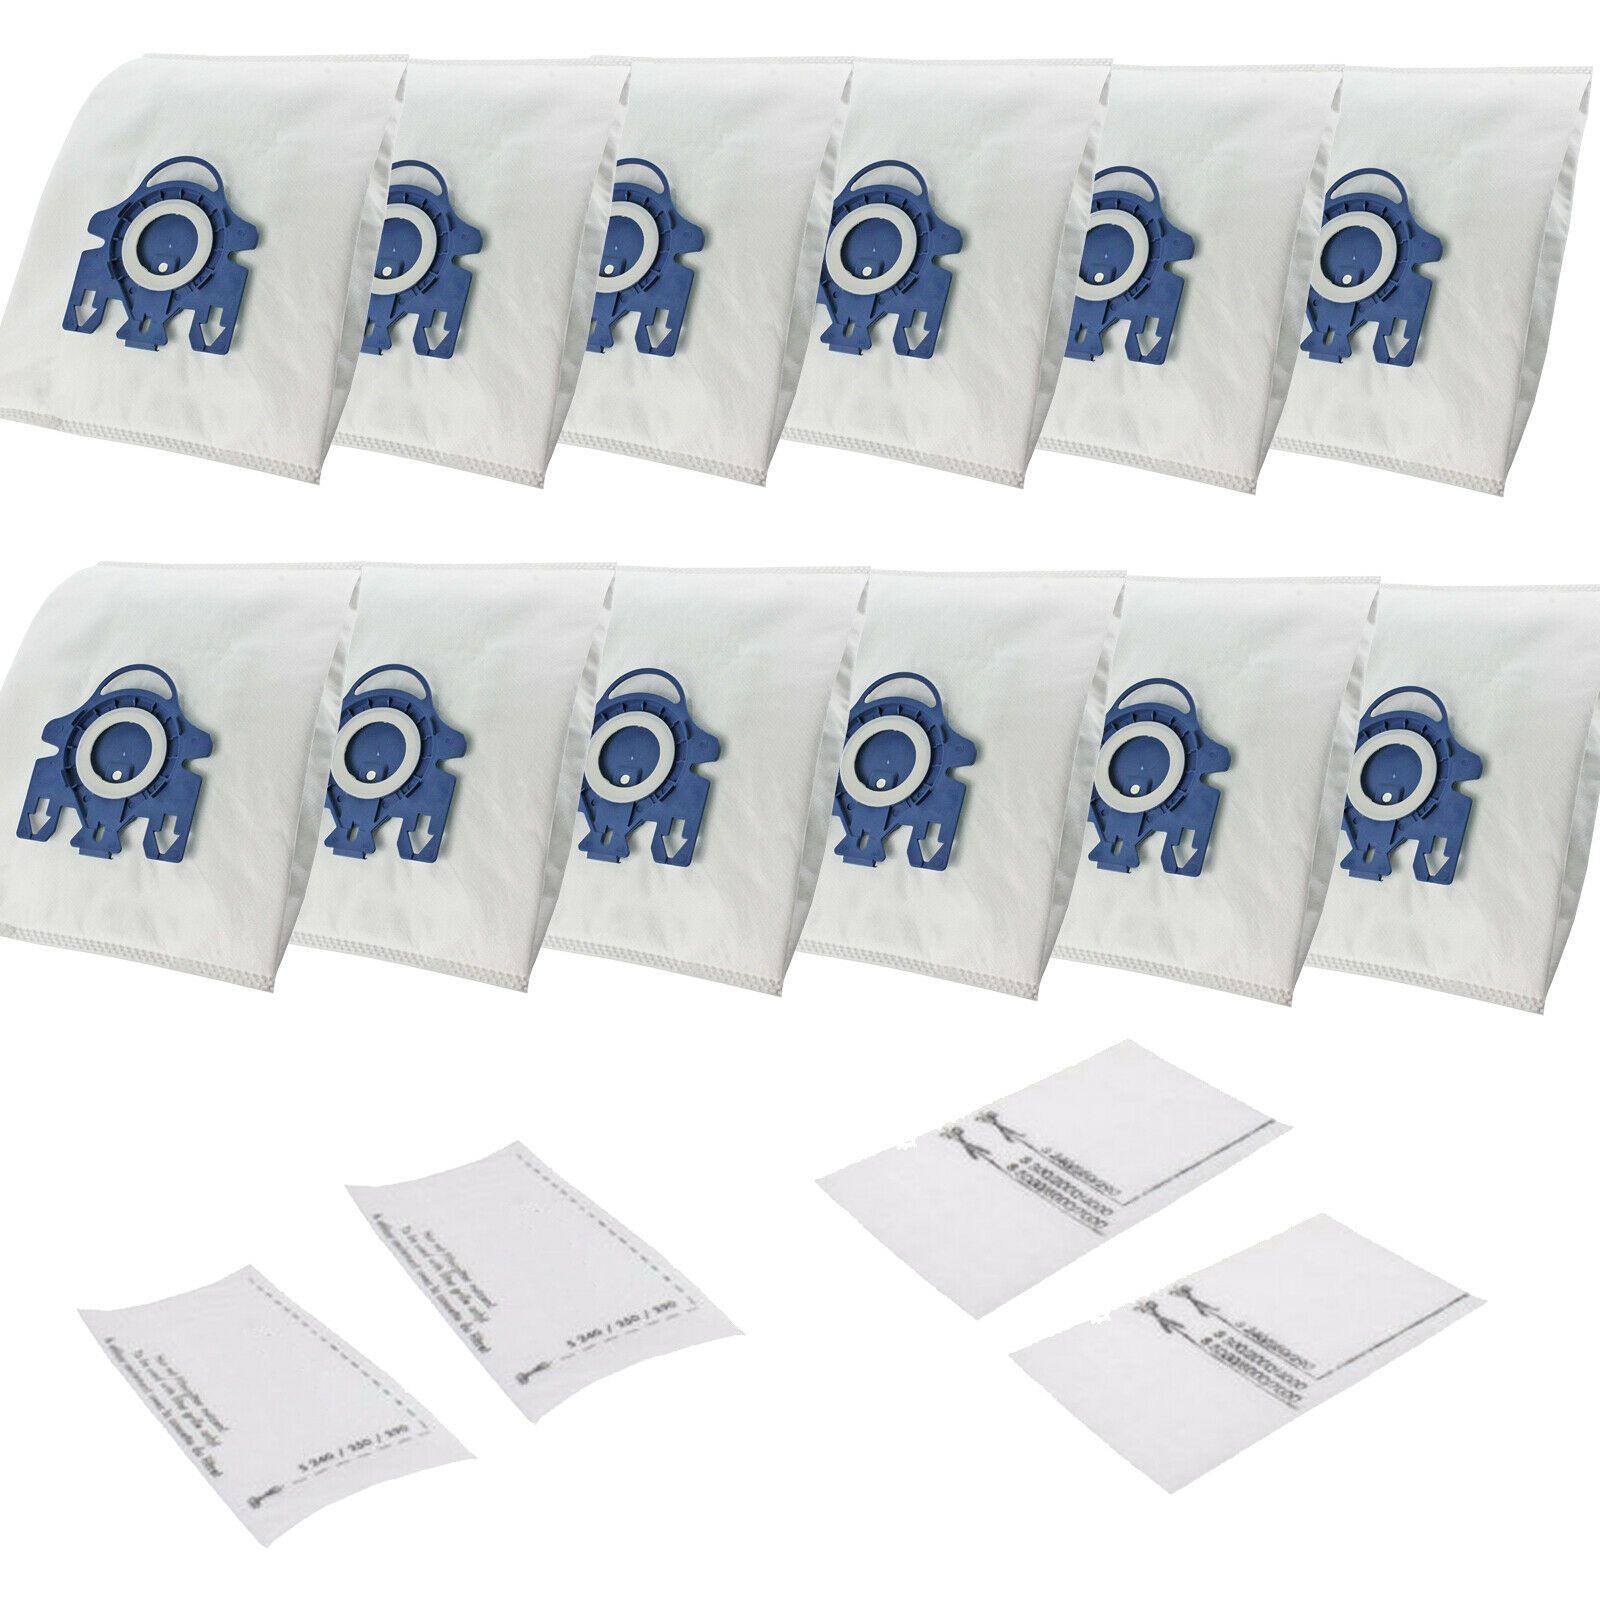 12 Synthetic Bags + 8 Filters For Miele GN S5360 S5310 S5311 + SBB S5320 S5321 Sparesbarn